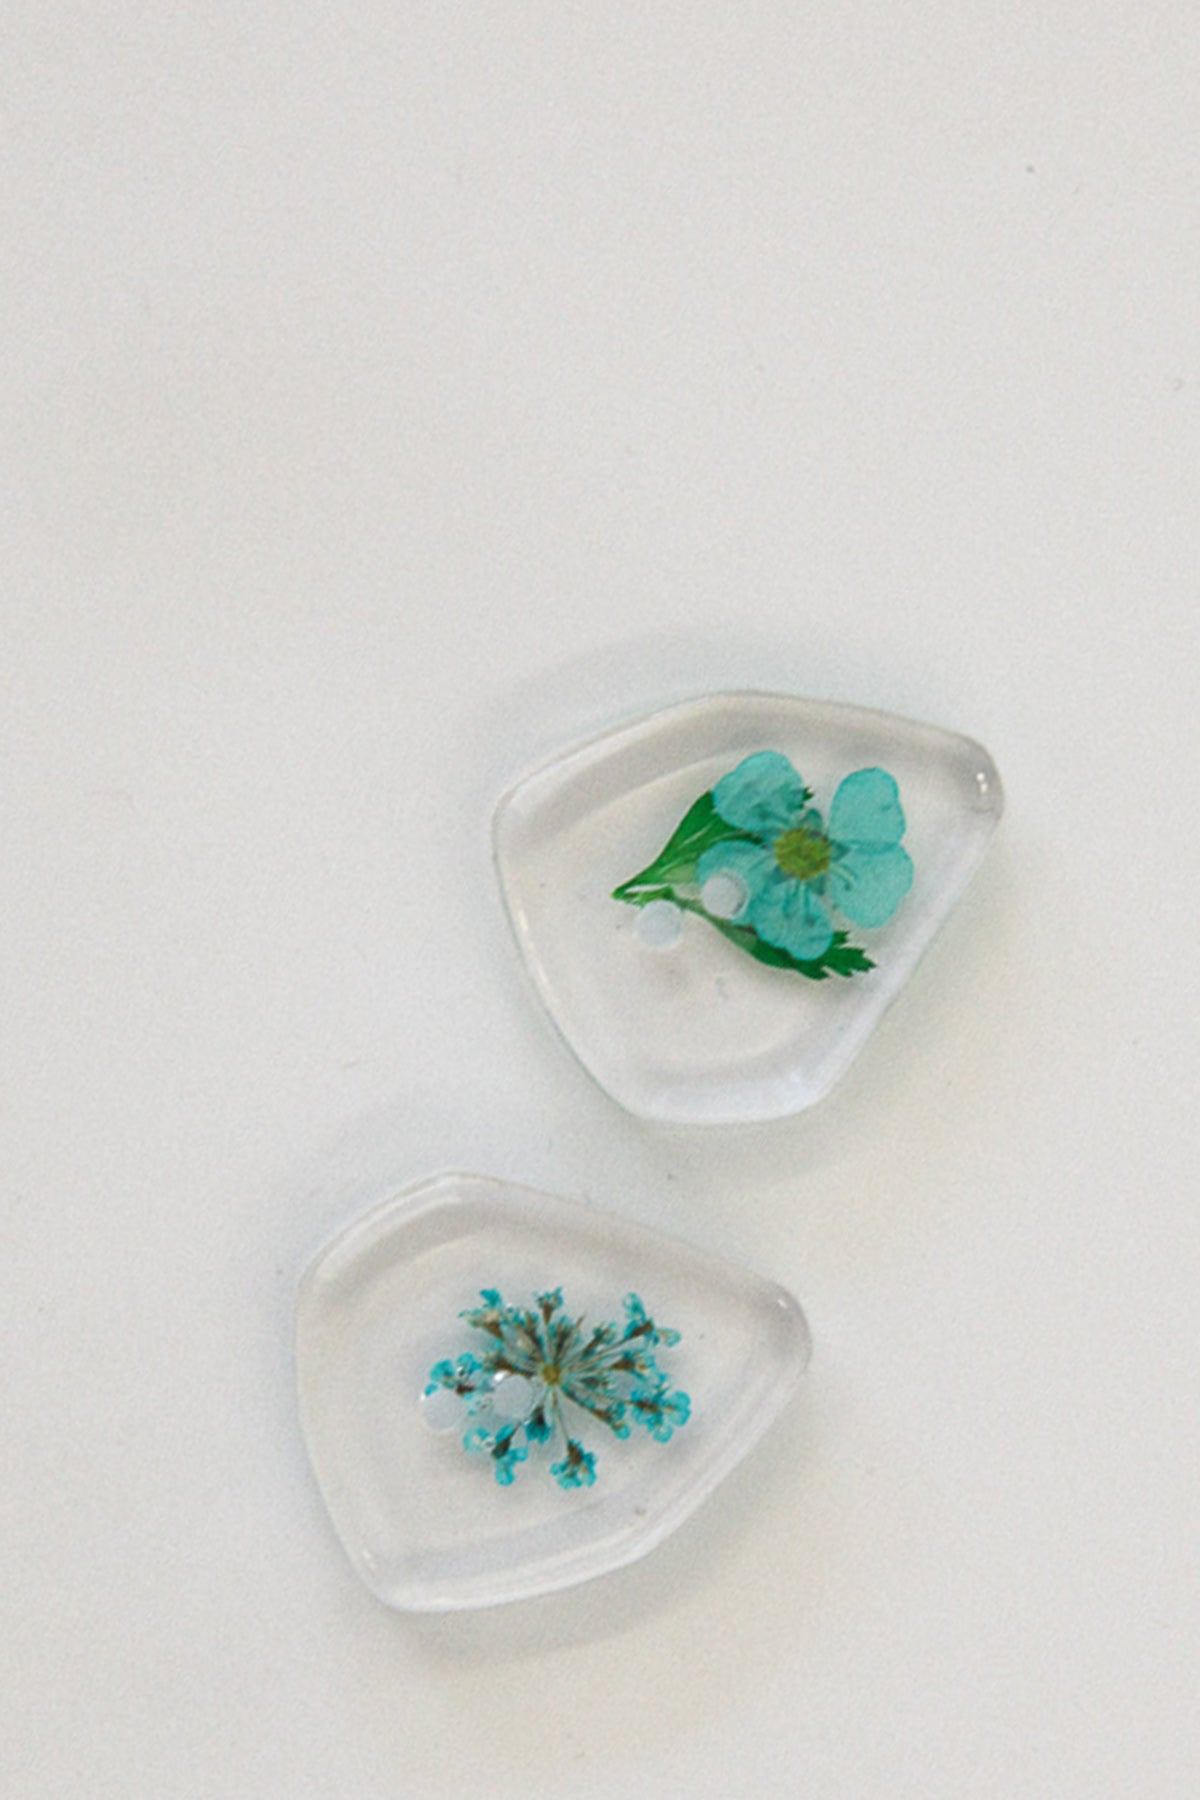 Flower Pressed Lucite Buttons - Asymmetrical